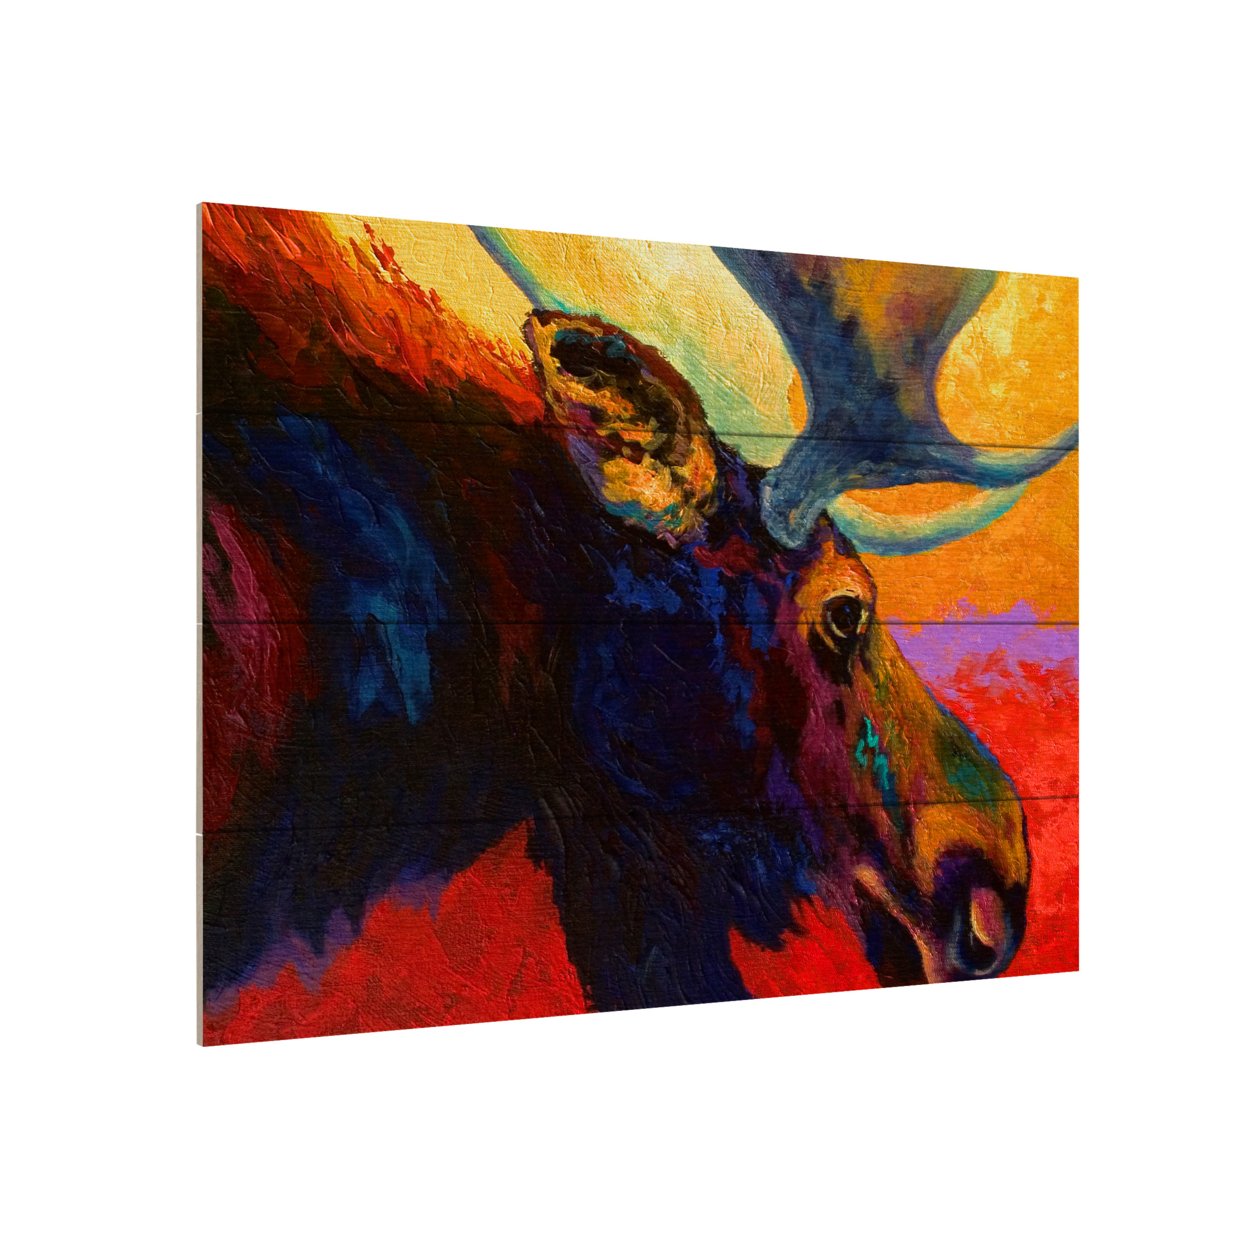 Wall Art 12 X 16 Inches Titled Alaska Spirit Moose Ready To Hang Printed On Wooden Planks